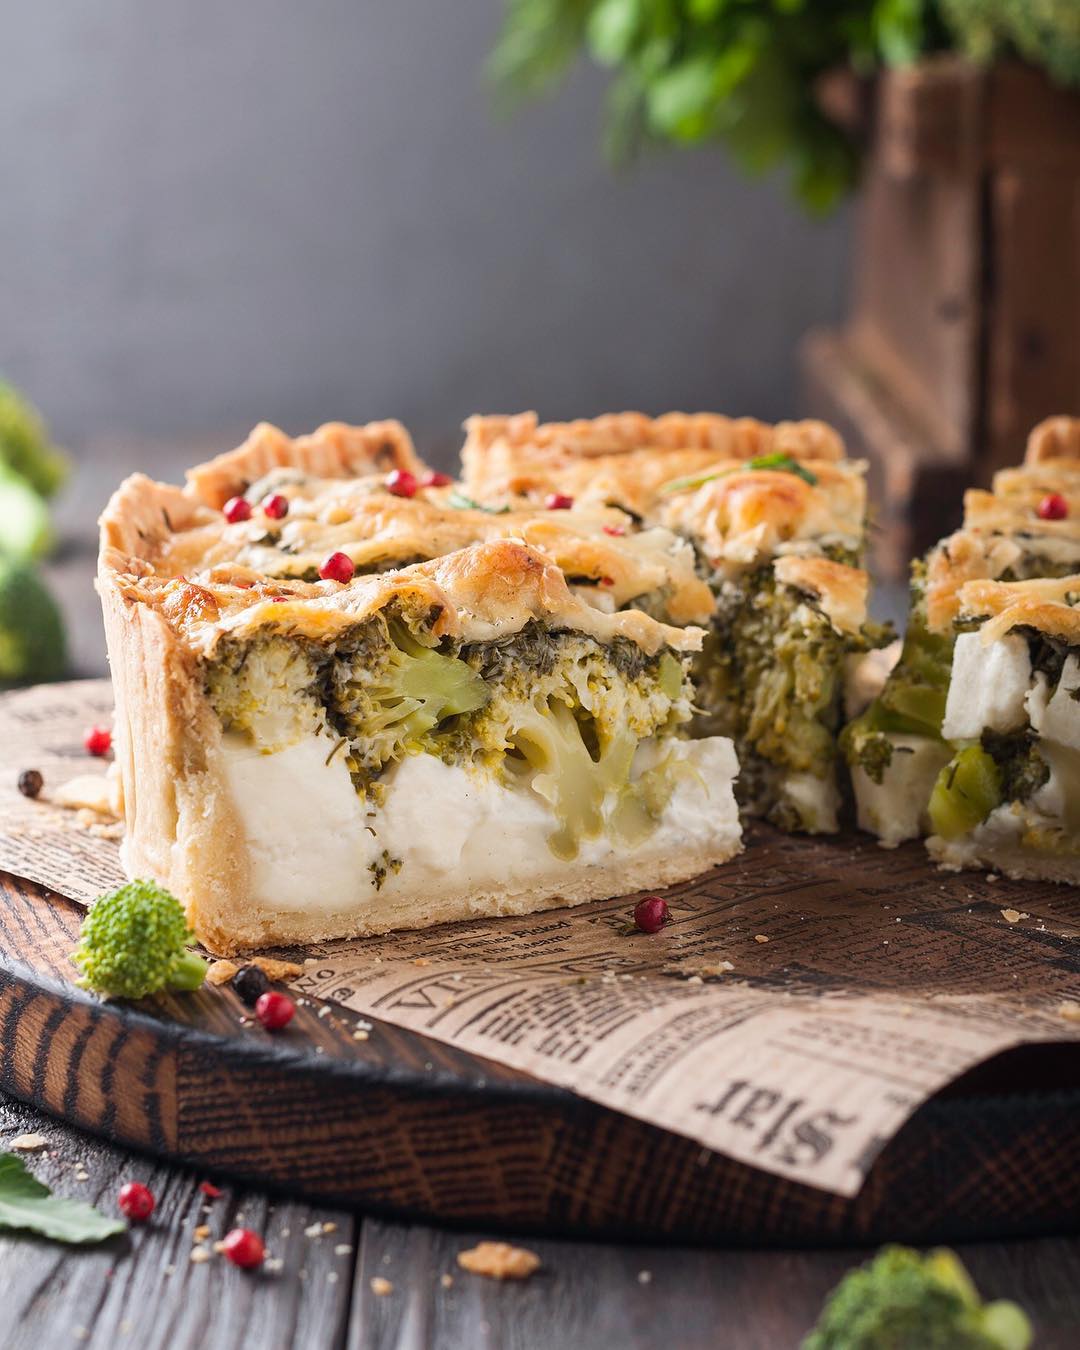 BROCCOLI PIE WITH COTTAGE CHEESE